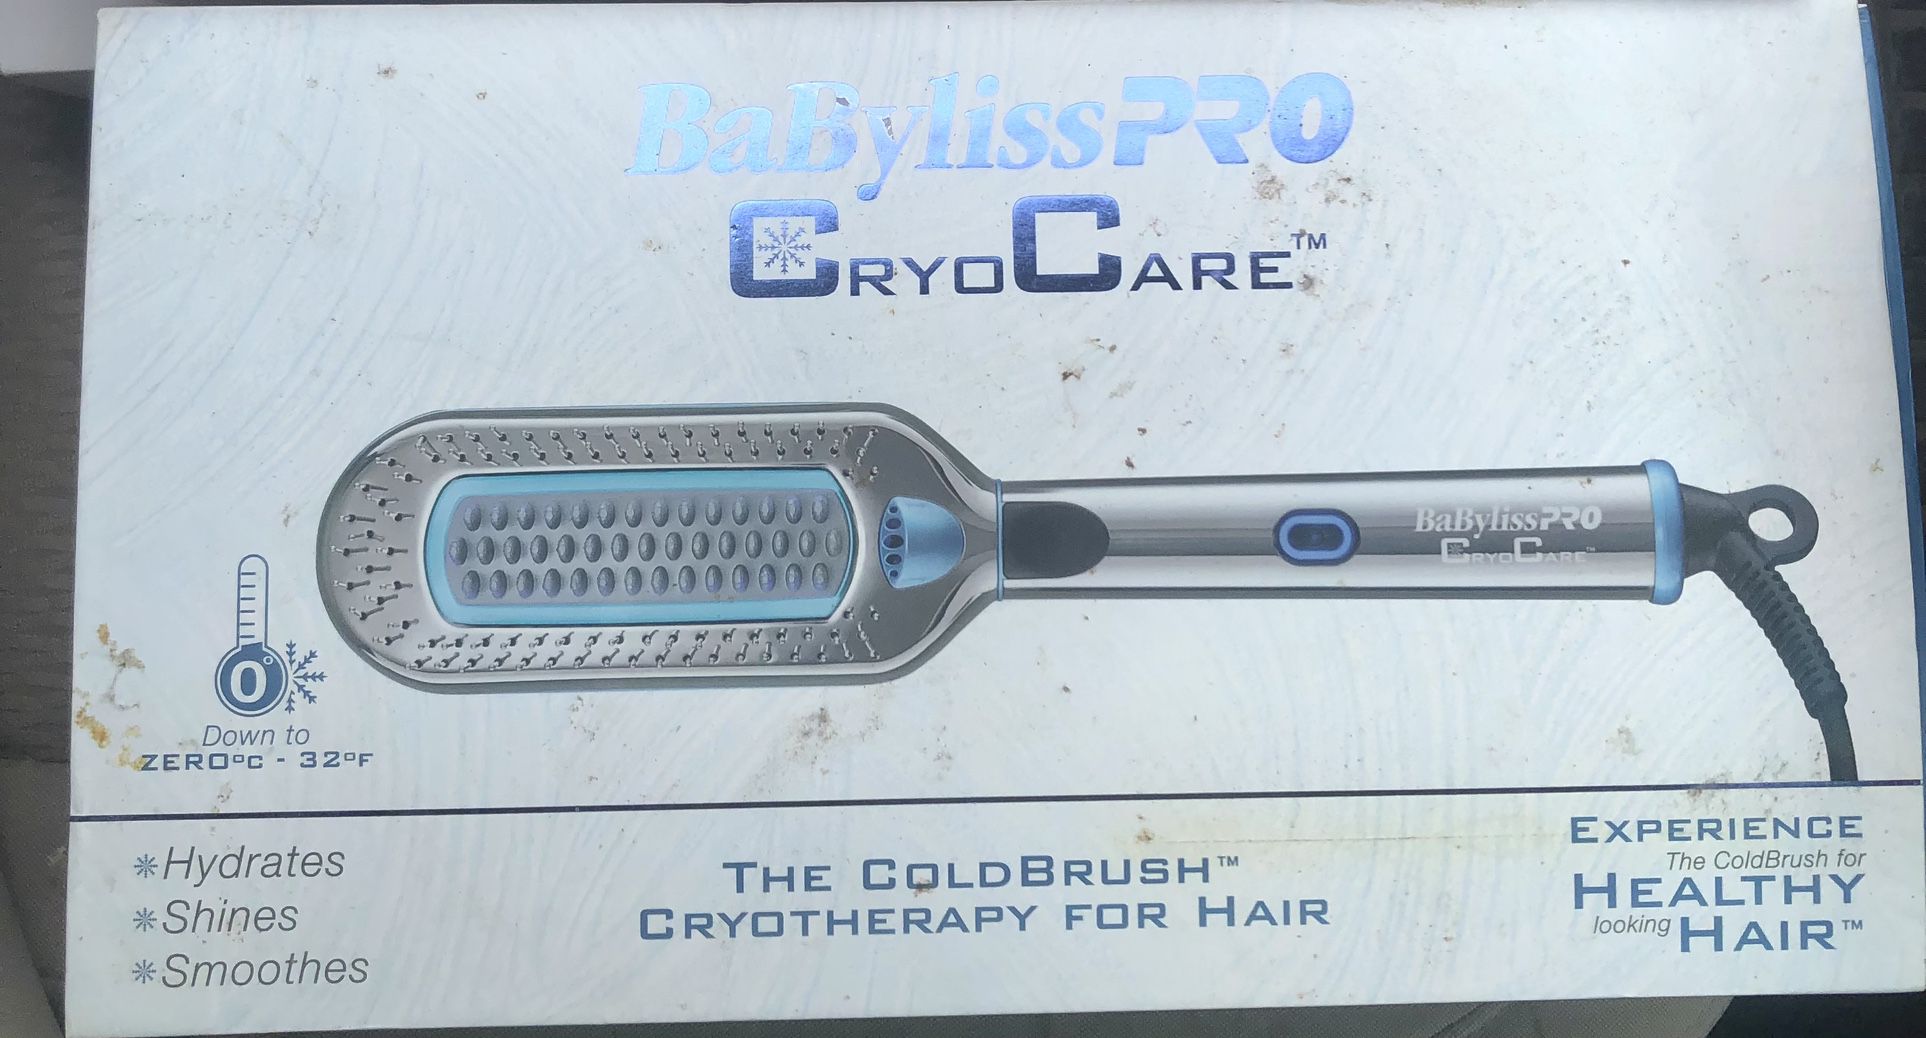  Babylisspro Cryocare The Cold brush Cryotherapy For Hair